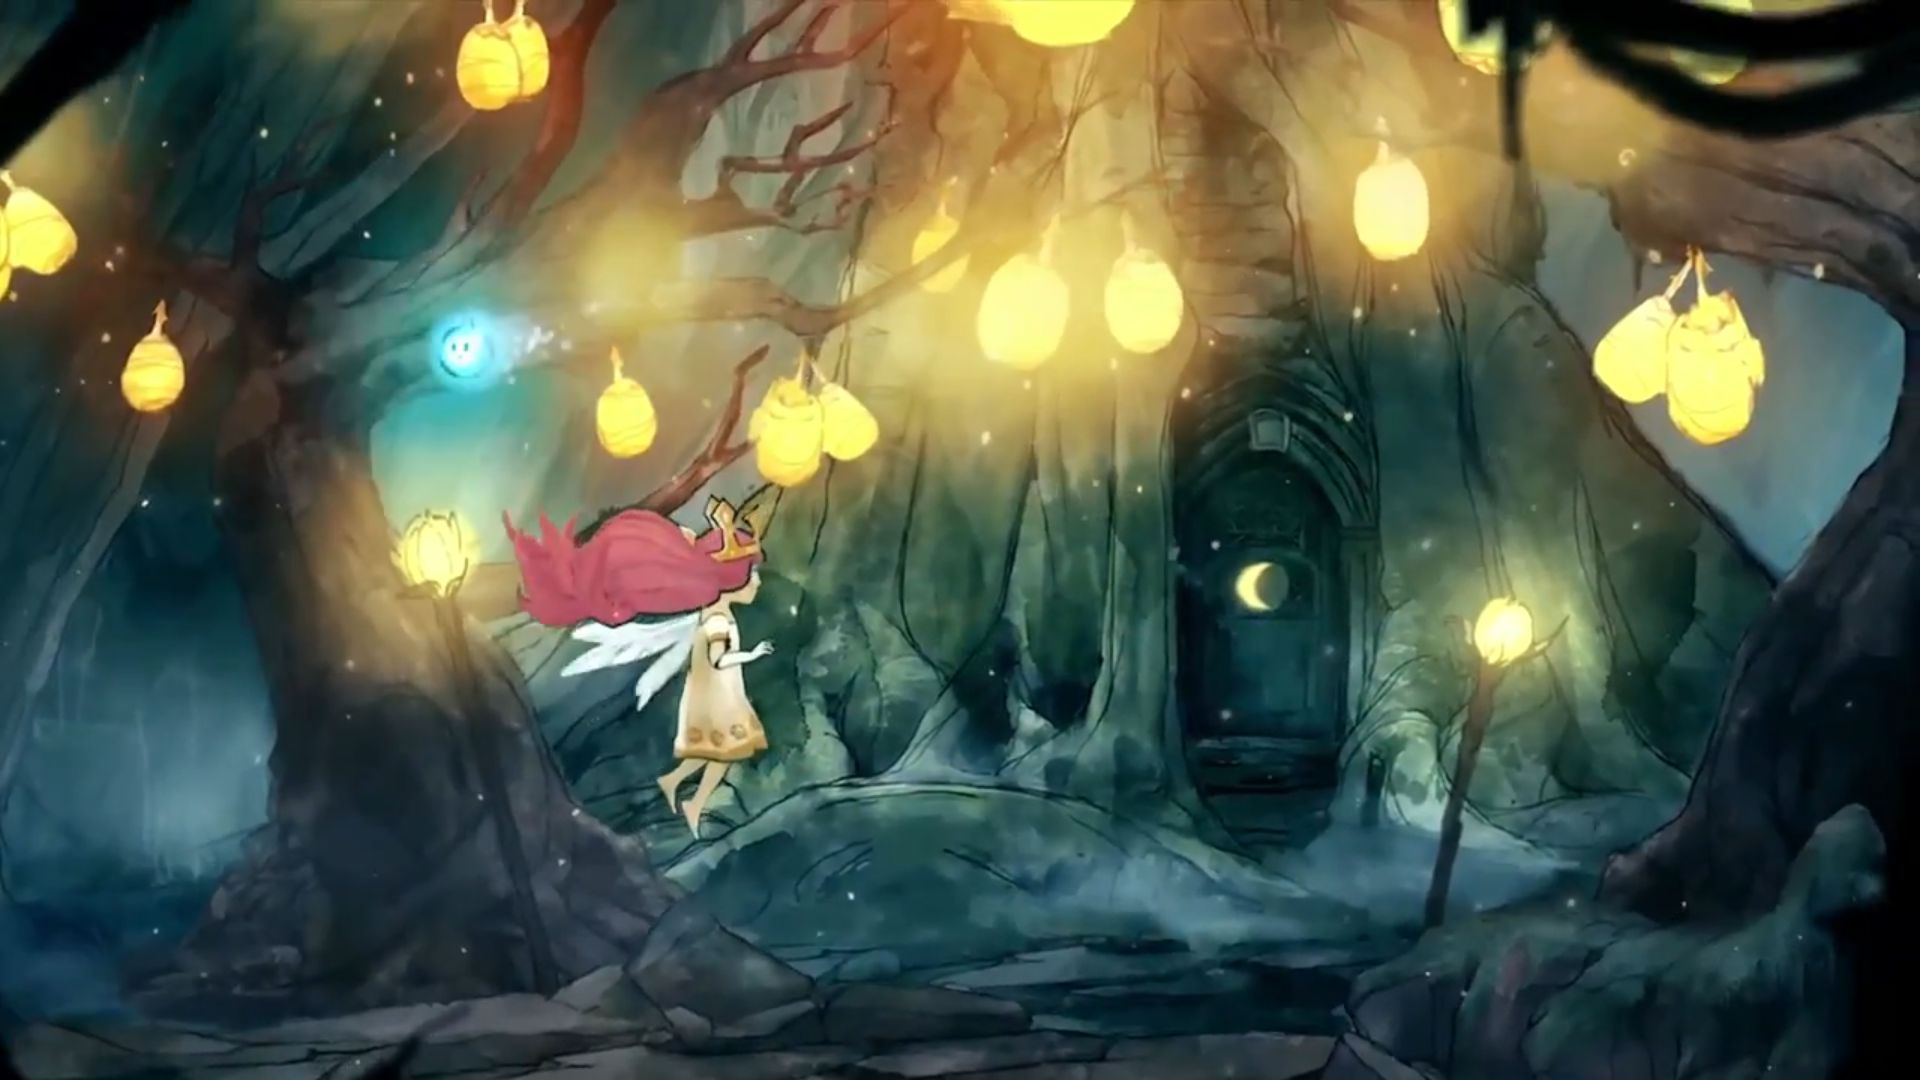 child of light ultimate edition